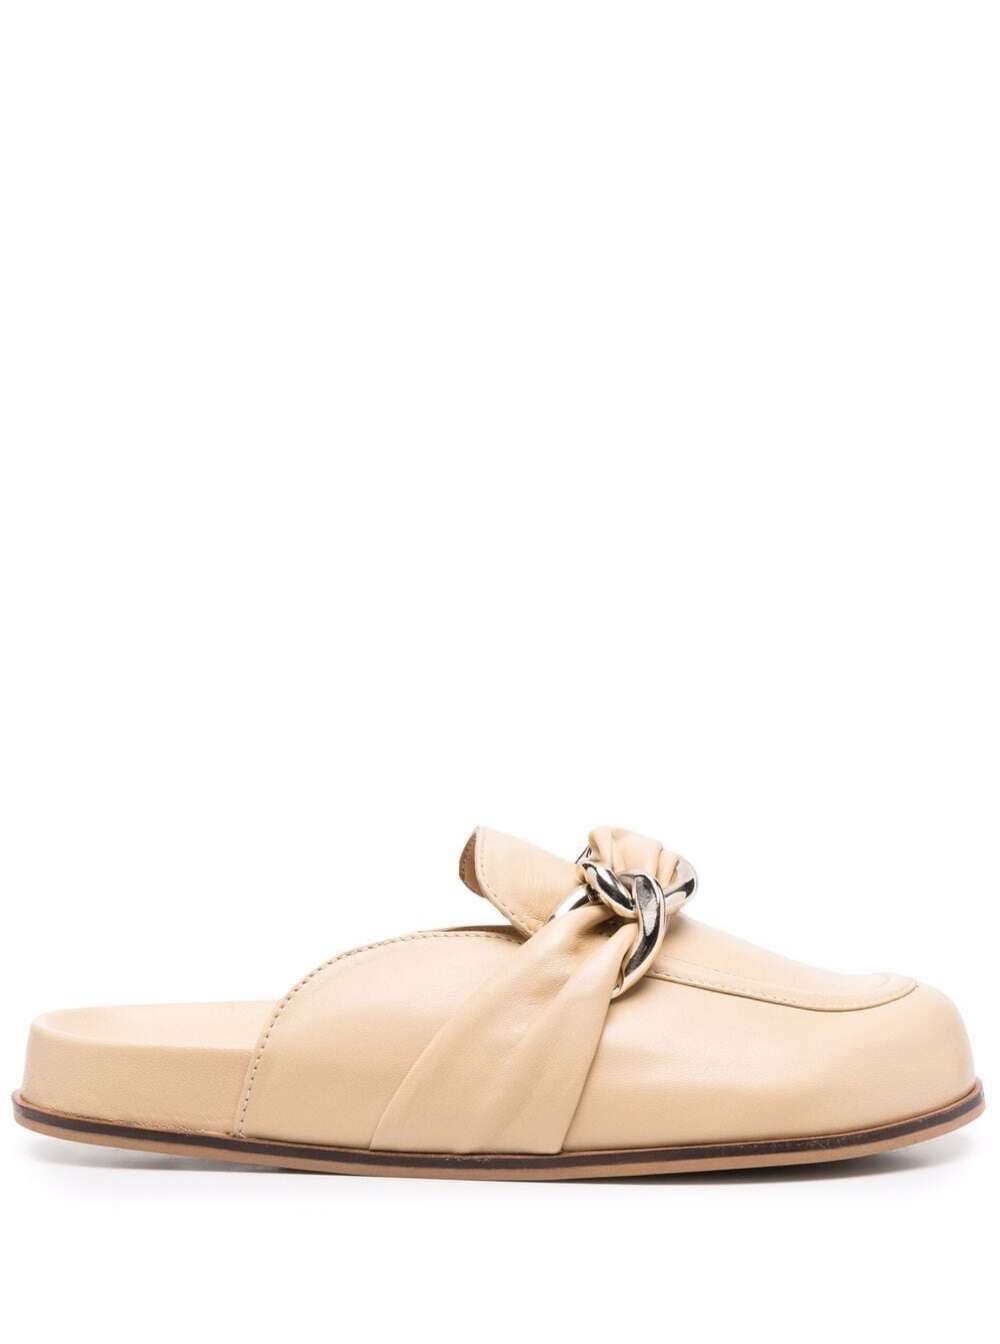 TwinSet Beige Leather Logo-plaque Mules